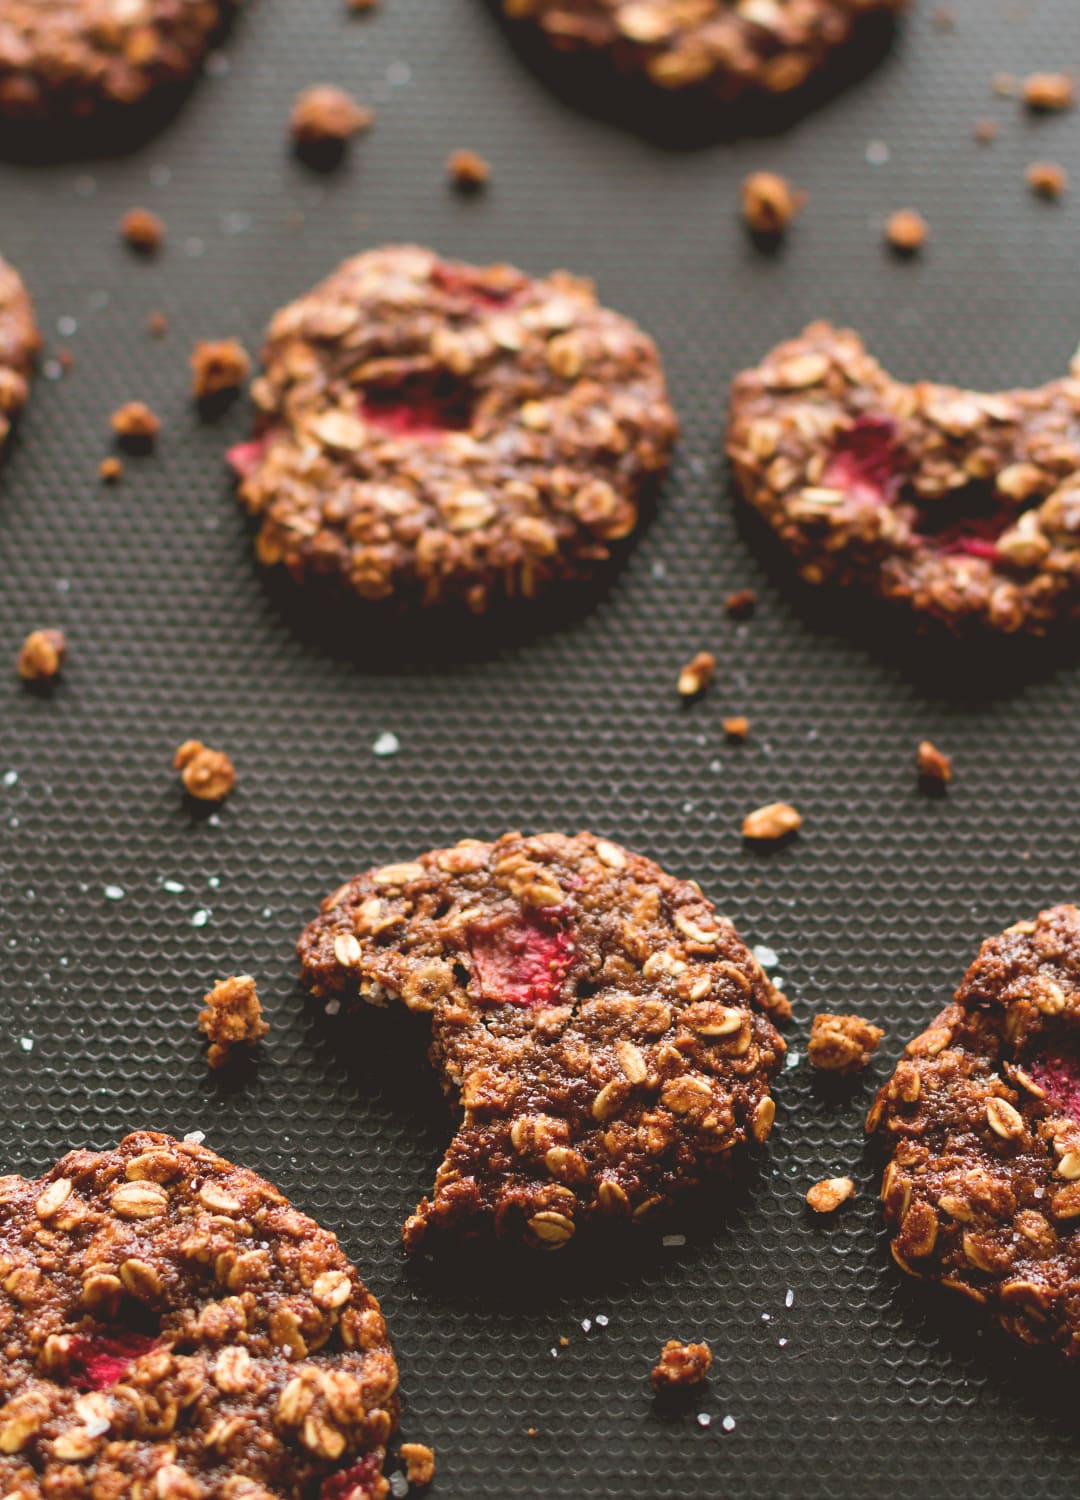 Strawberry Coconut Sugar Cookies - delicious vegan summer cookies. We love this recipe! They're chewy, sweet, full of strawberry flavor and absolutely heavenly. Gluten-free, vegan, and without any processed sugar. | thehealthfulideas.com